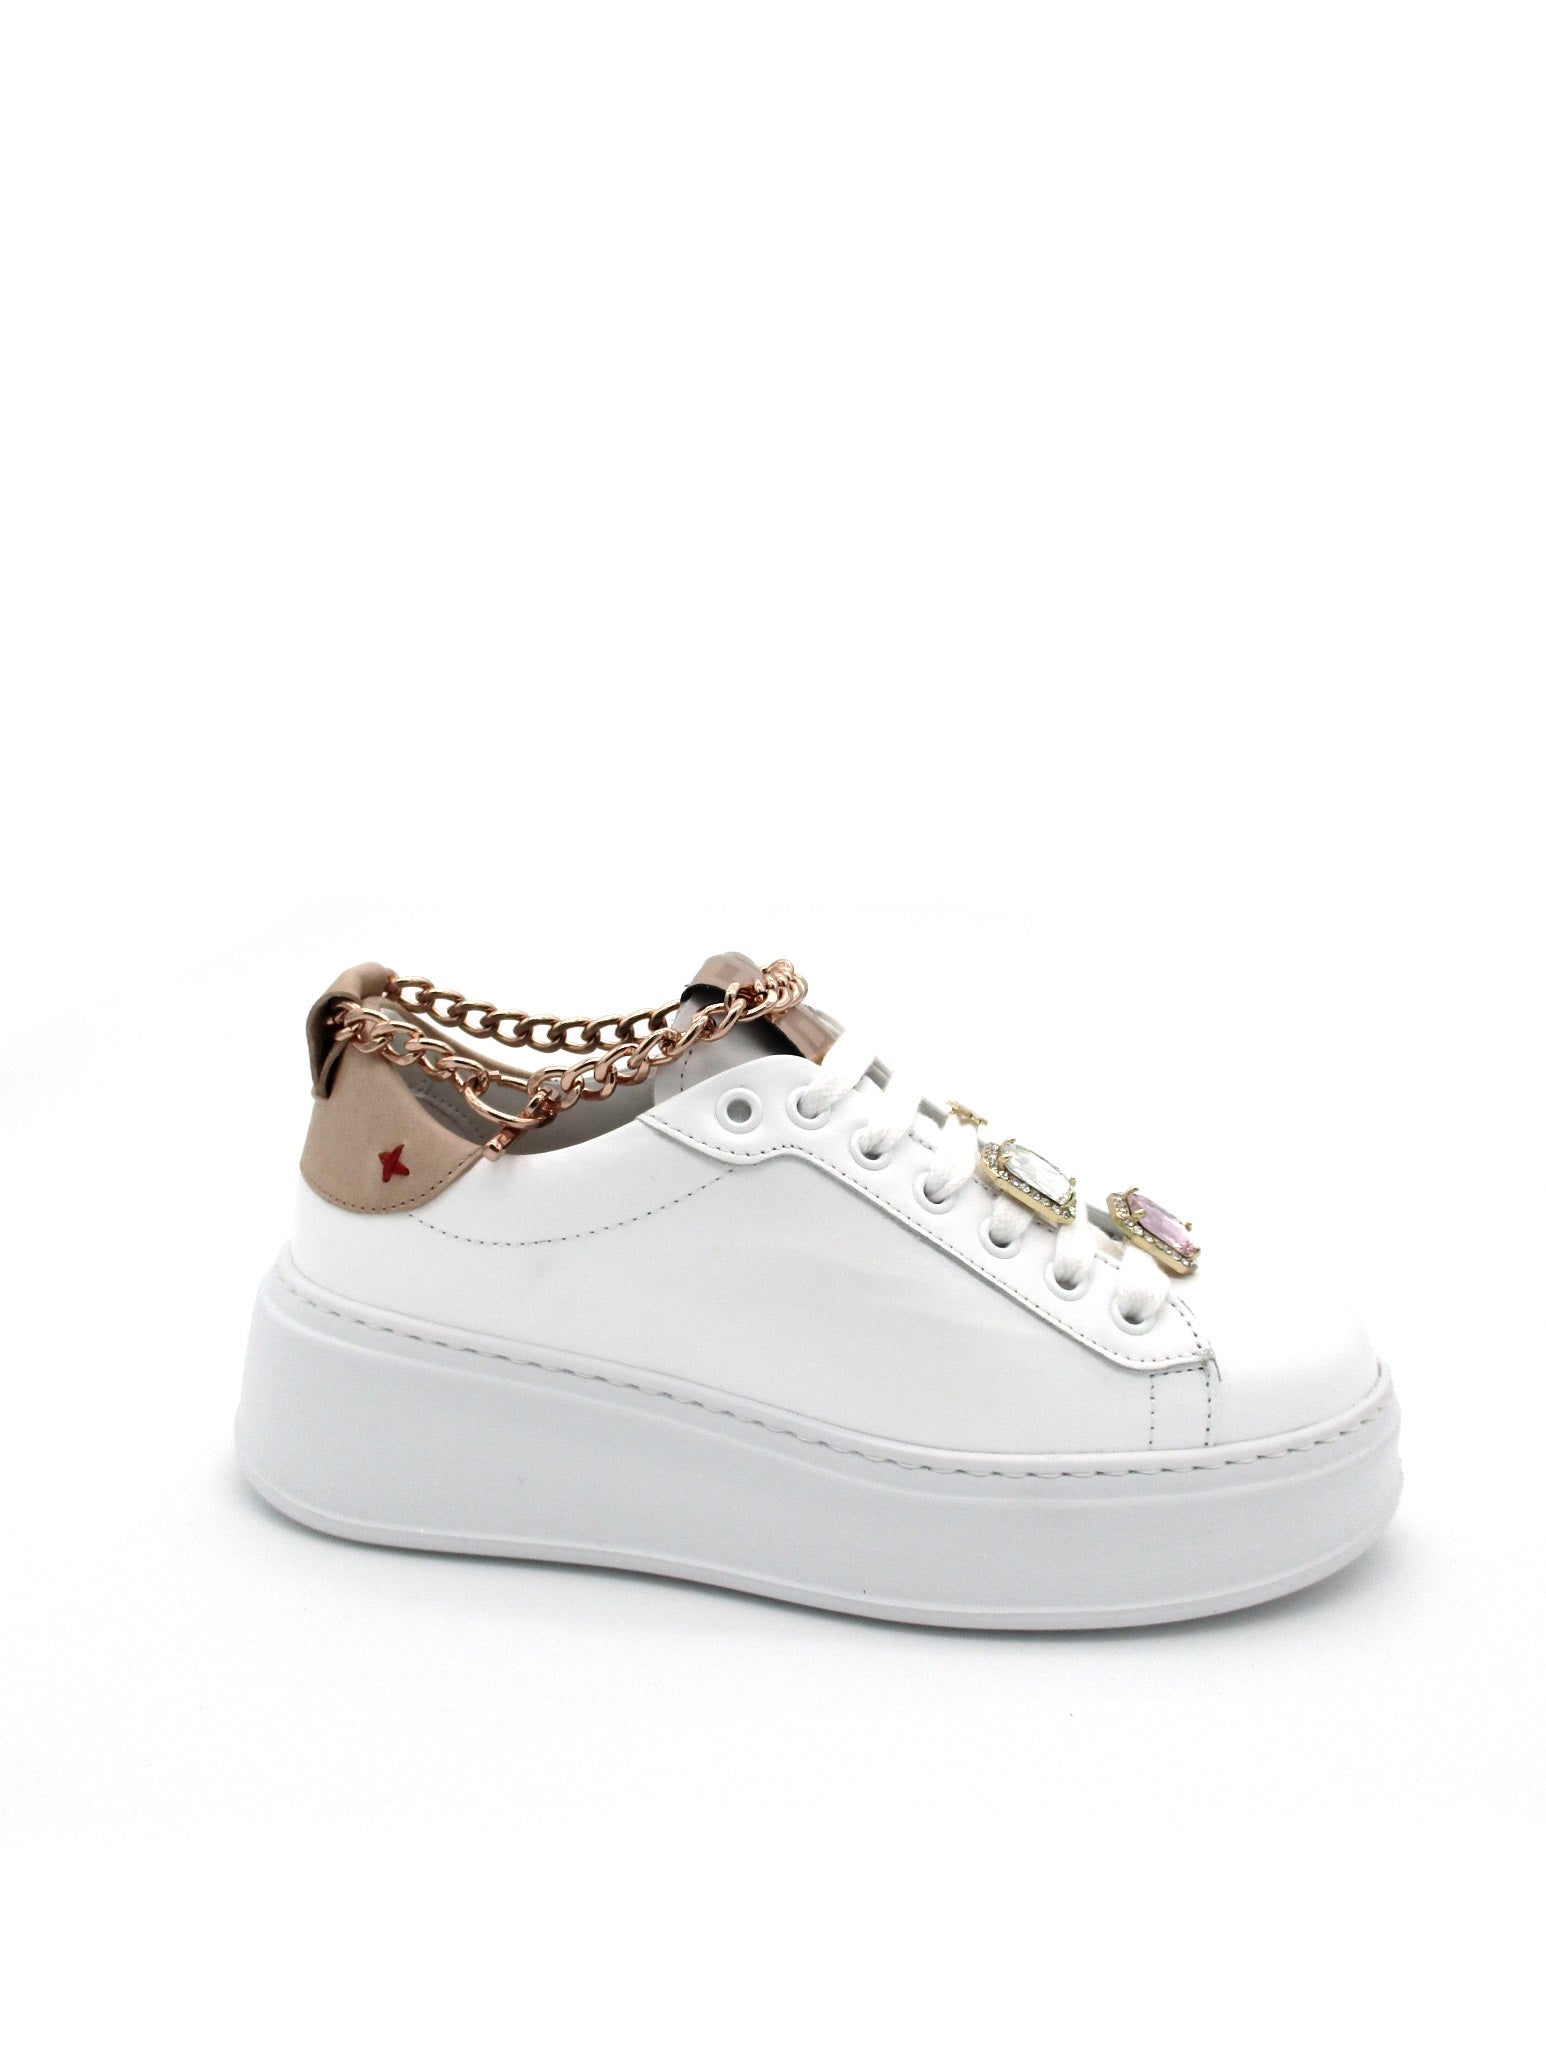 Sneaker pelle donna GIO+ G762A Bianca